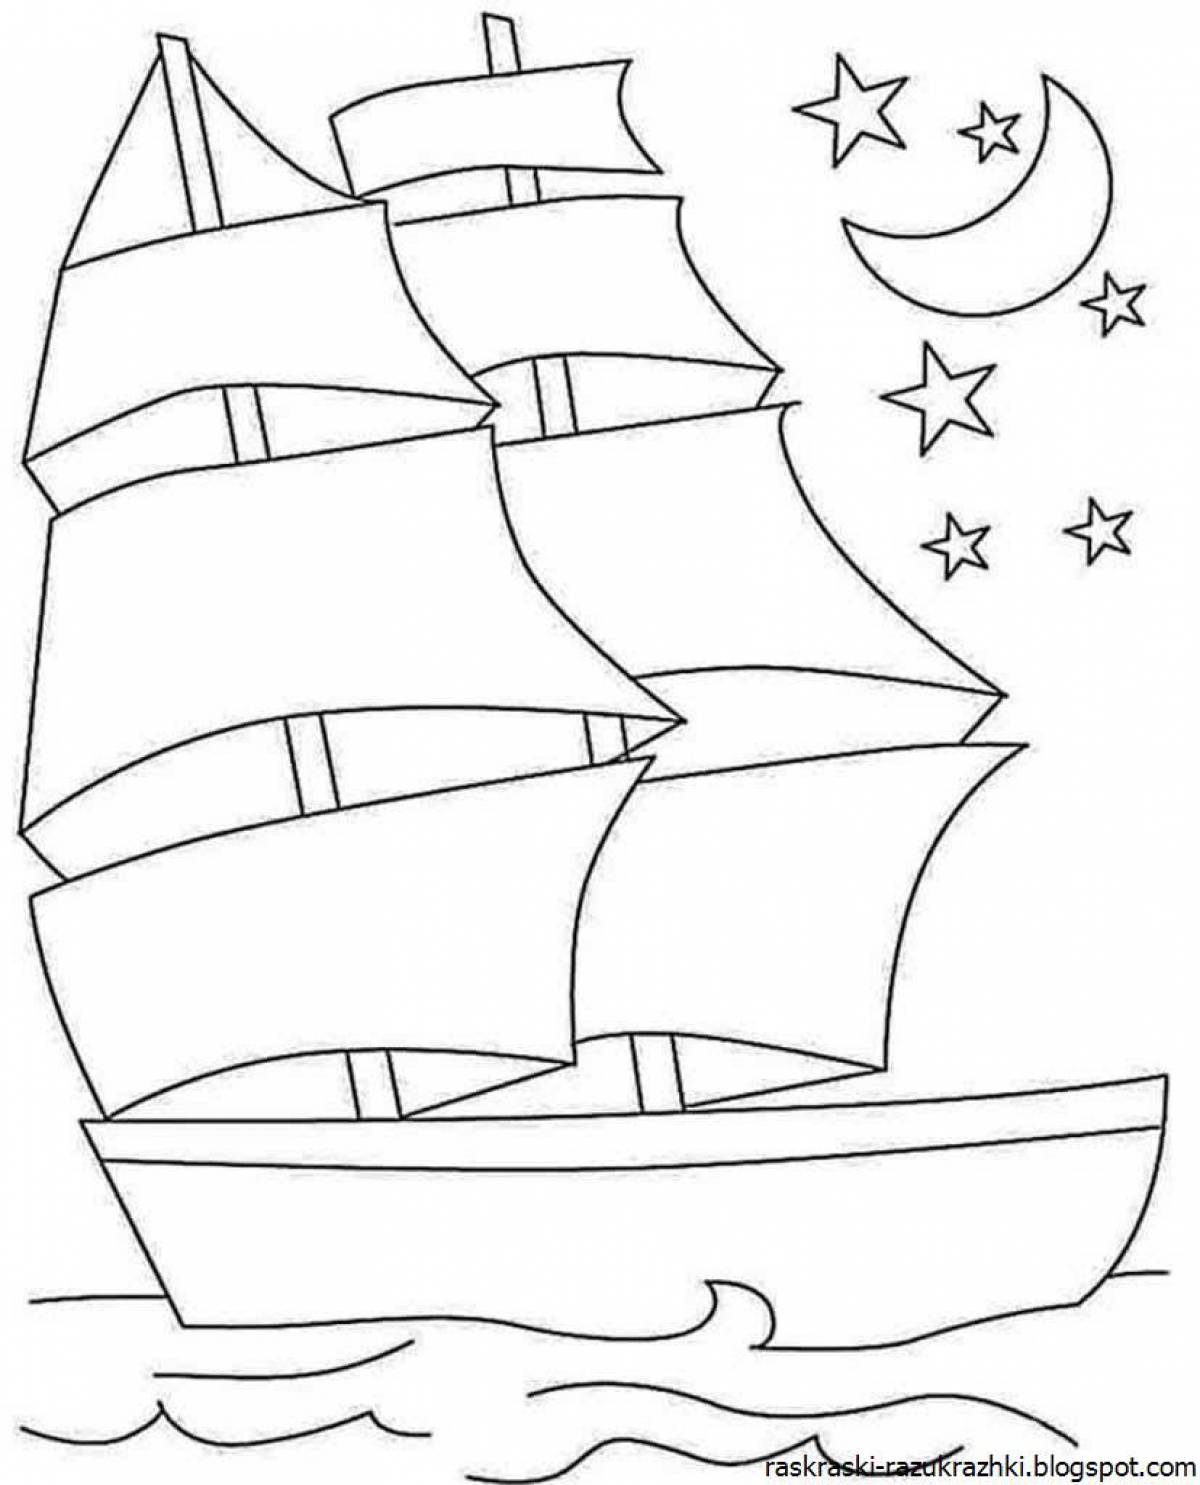 Spatter ship coloring book for kids